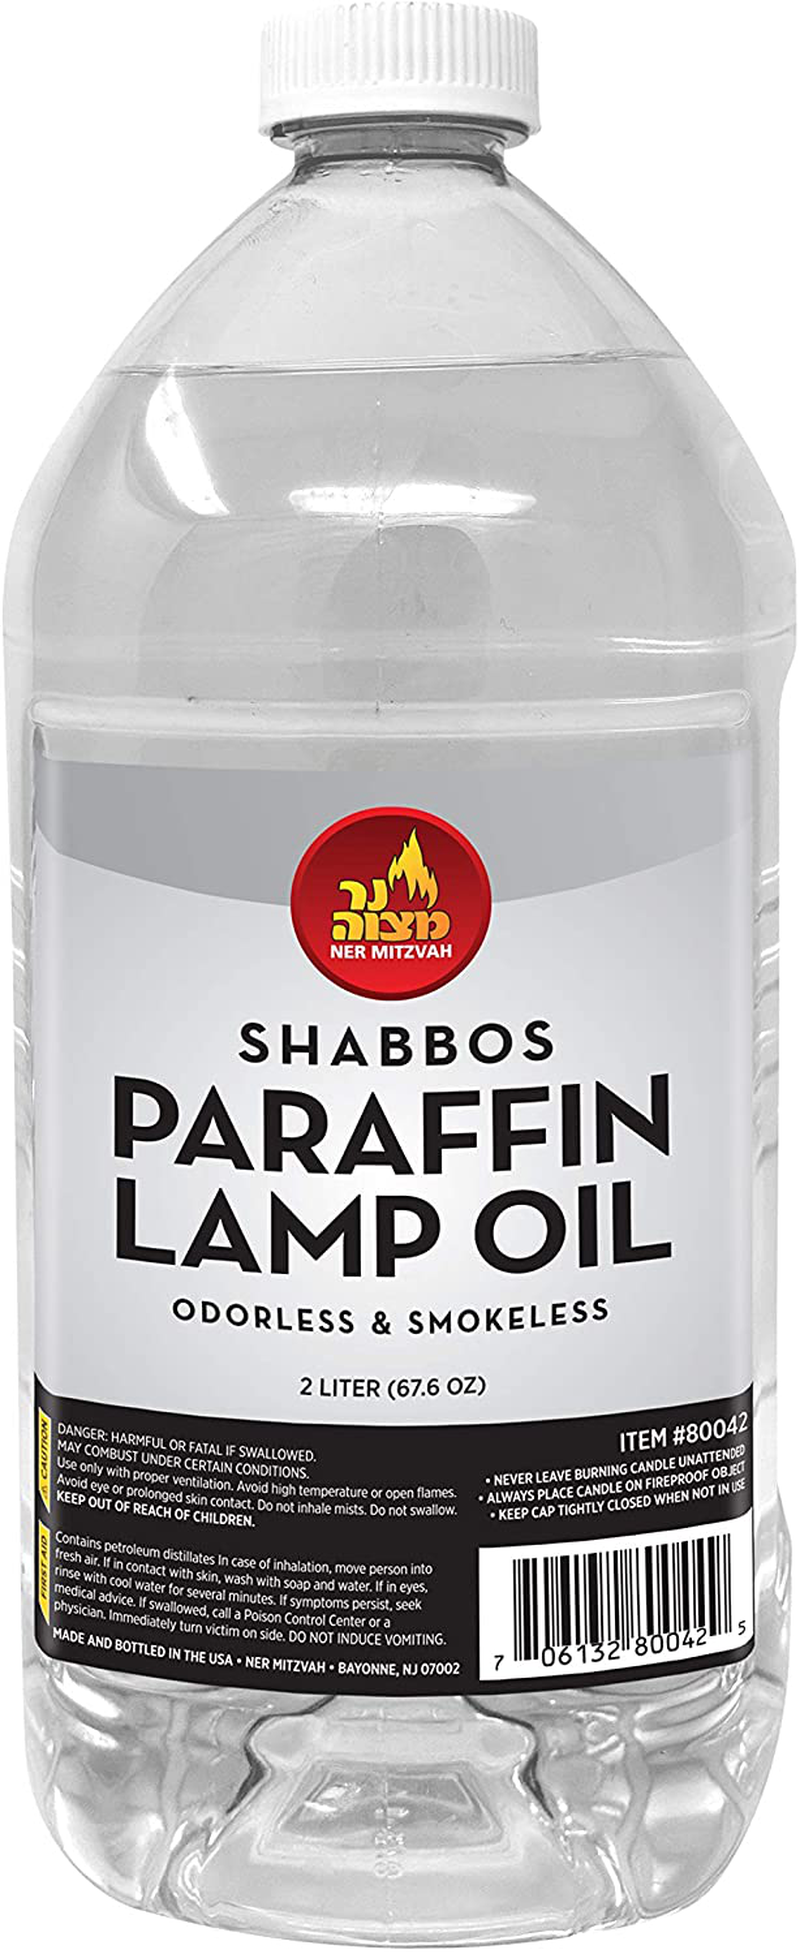 Ner Mitzvah Paraffin Lamp Oil - Clear Smokeless, Odorless, Clean Burning Fuel for Indoor and Outdoor Use - 2 Liter (67.6 oz) Home & Garden > Lighting Accessories > Oil Lamp Fuel Ner Mitzvah   